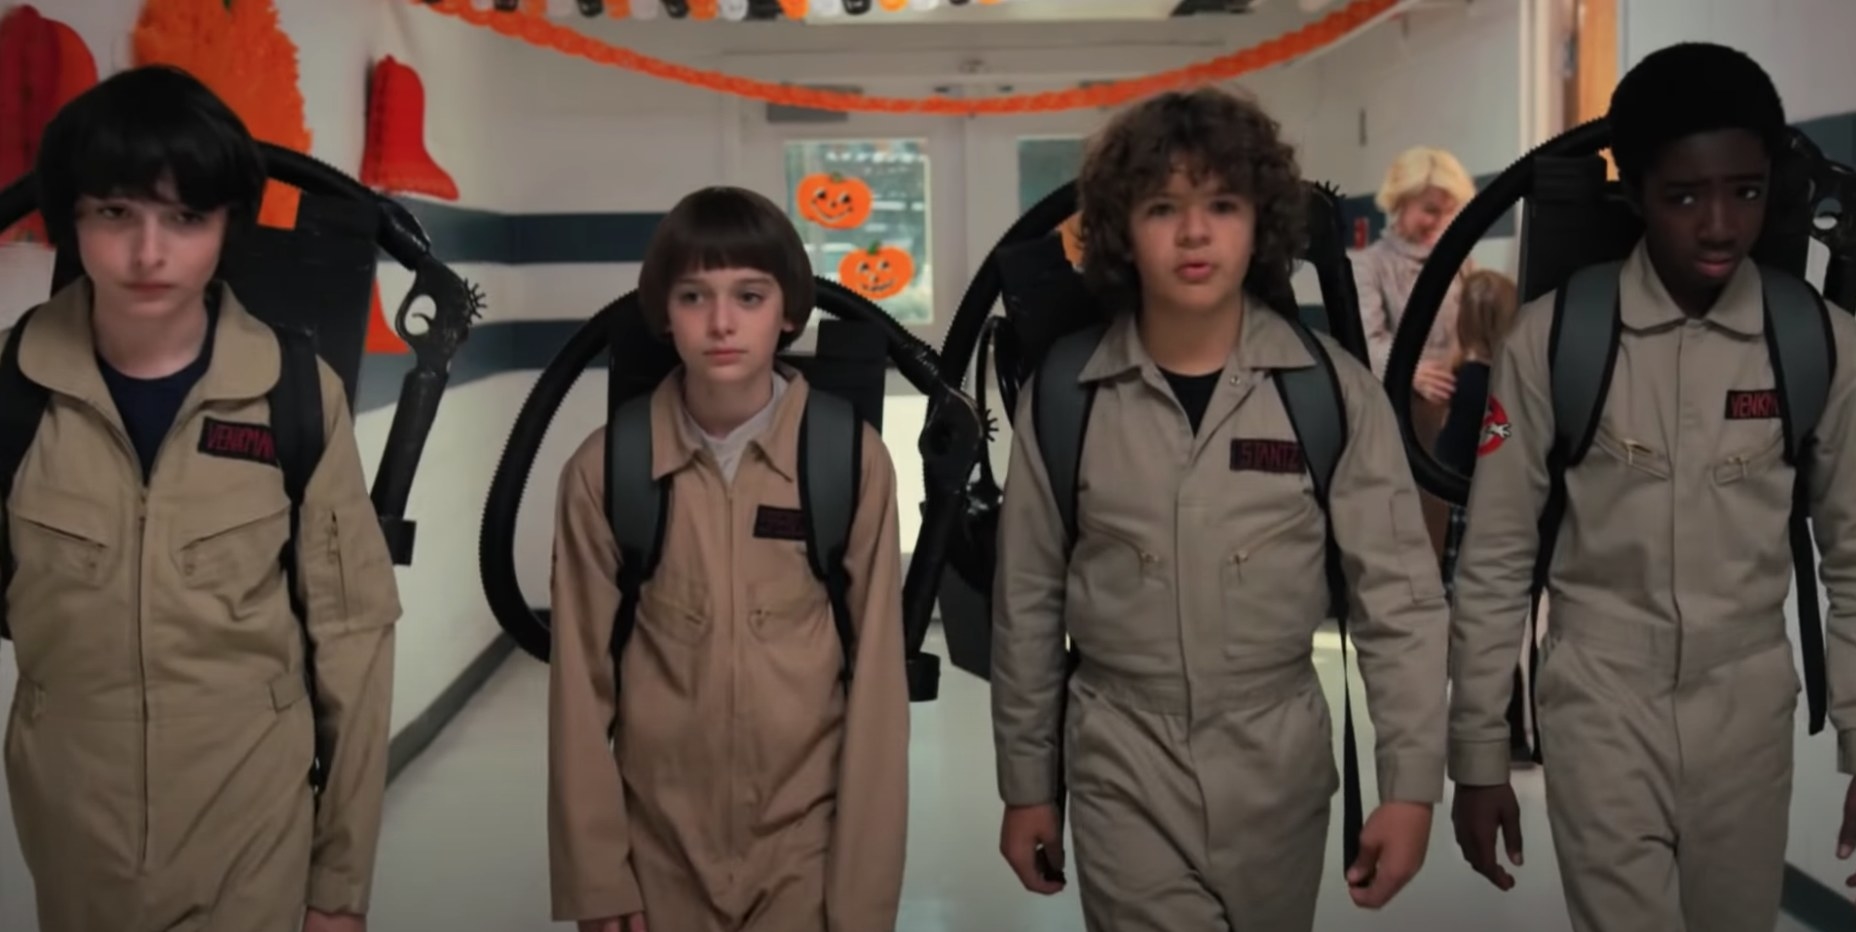 Mike, Will, Dustin, and Lucas in Ghostbuster costumes